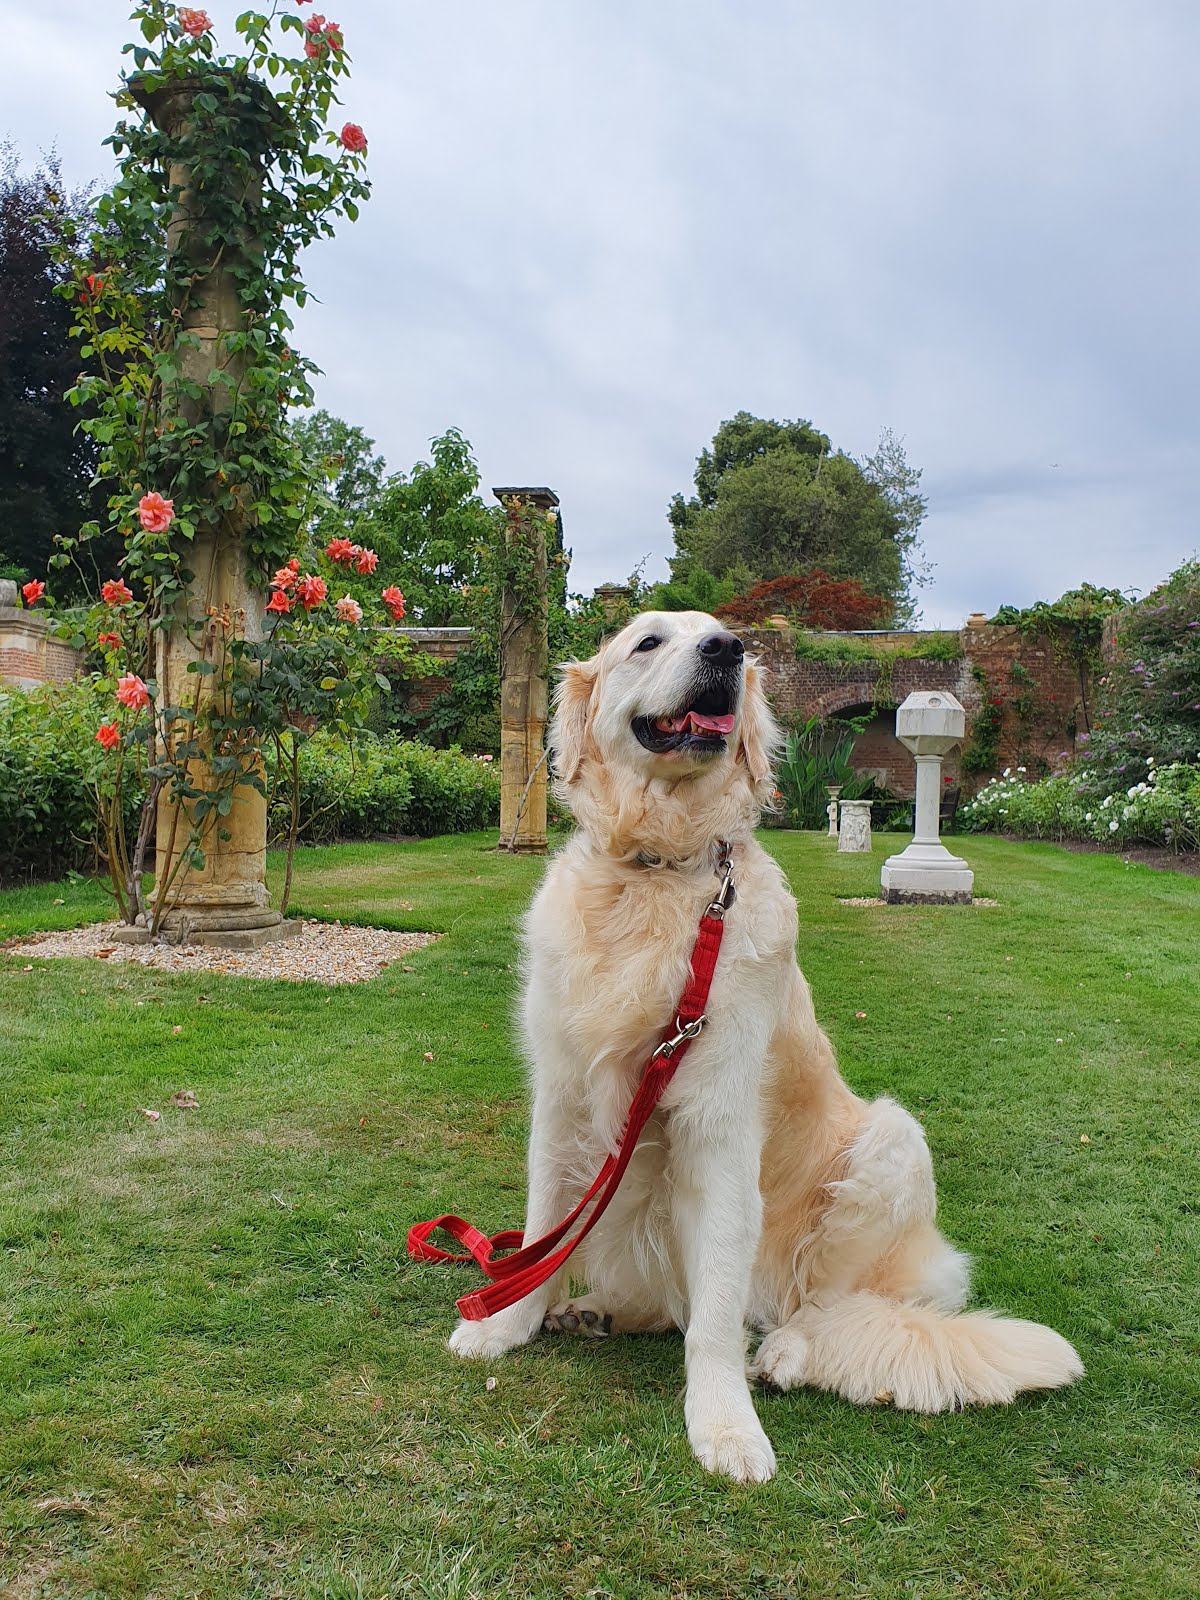 A rather regal Polly at Hever Castle!